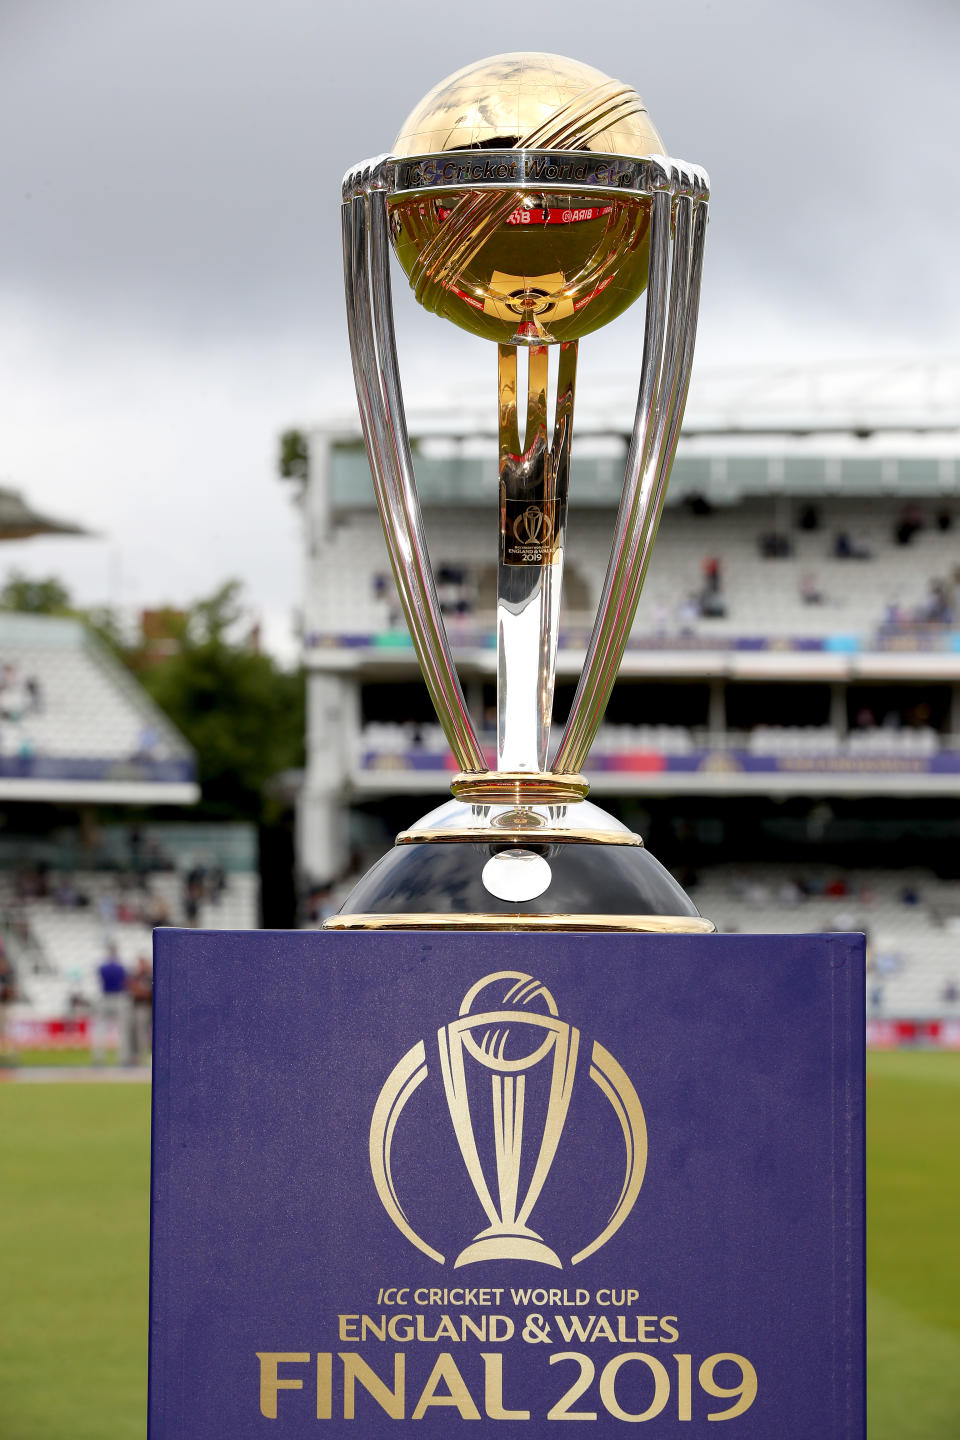 A detail view of the World Cup trophy ahead of the ICC World Cup Final at Lord's, London.